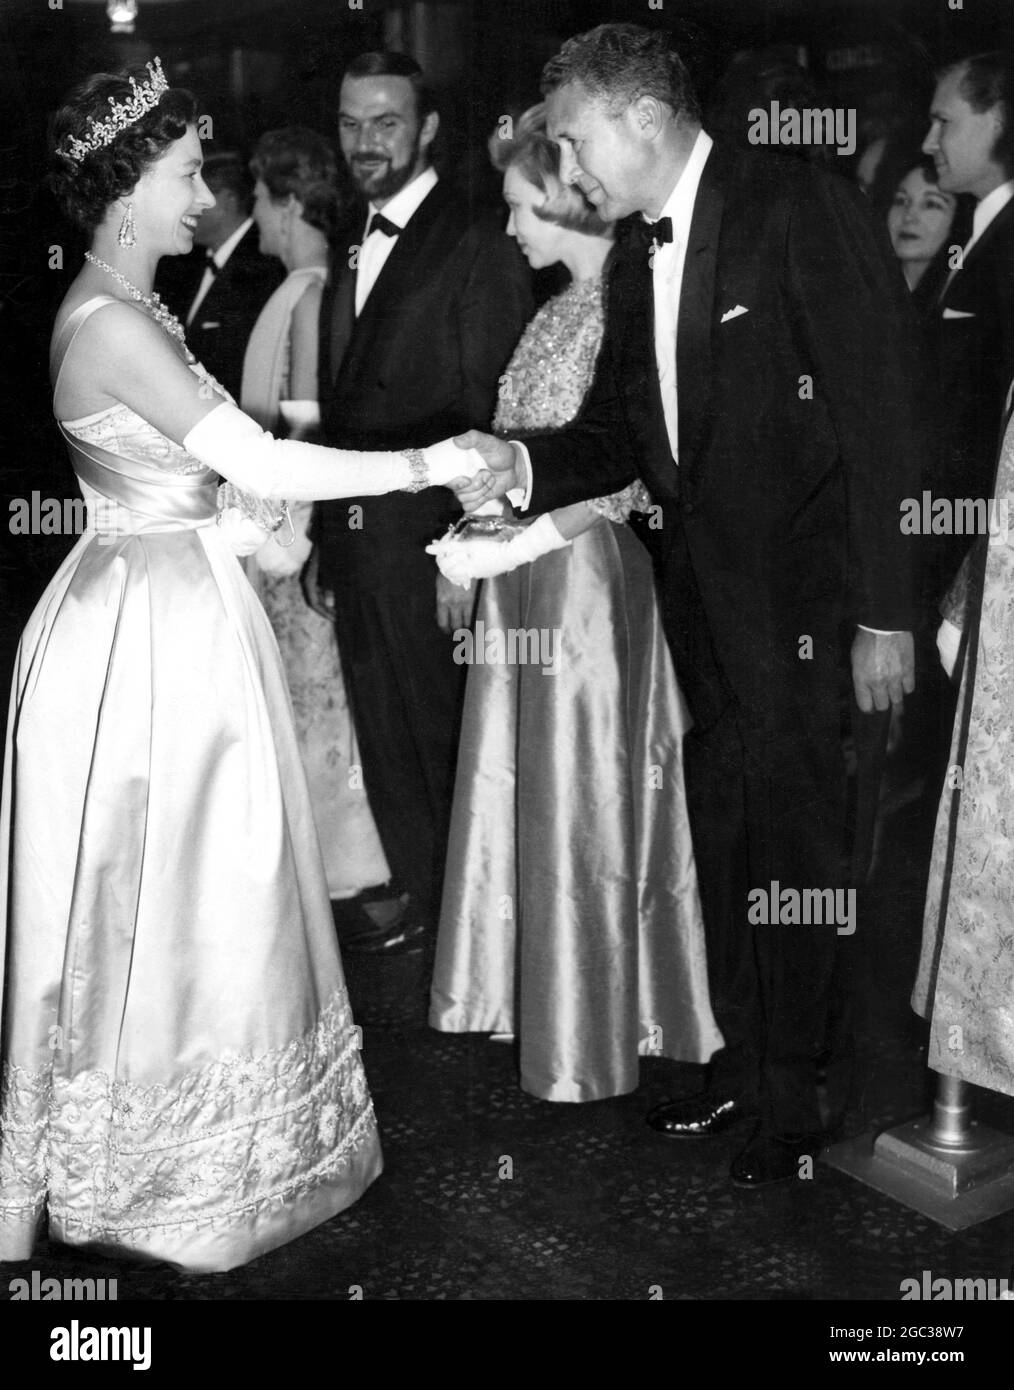 Her Majesty The Queen Elizabeth II at film premiere shakes hands with Anthony Quayle one of the stars in the the film The Guns of Navarone 27 April 1961 Stock Photo